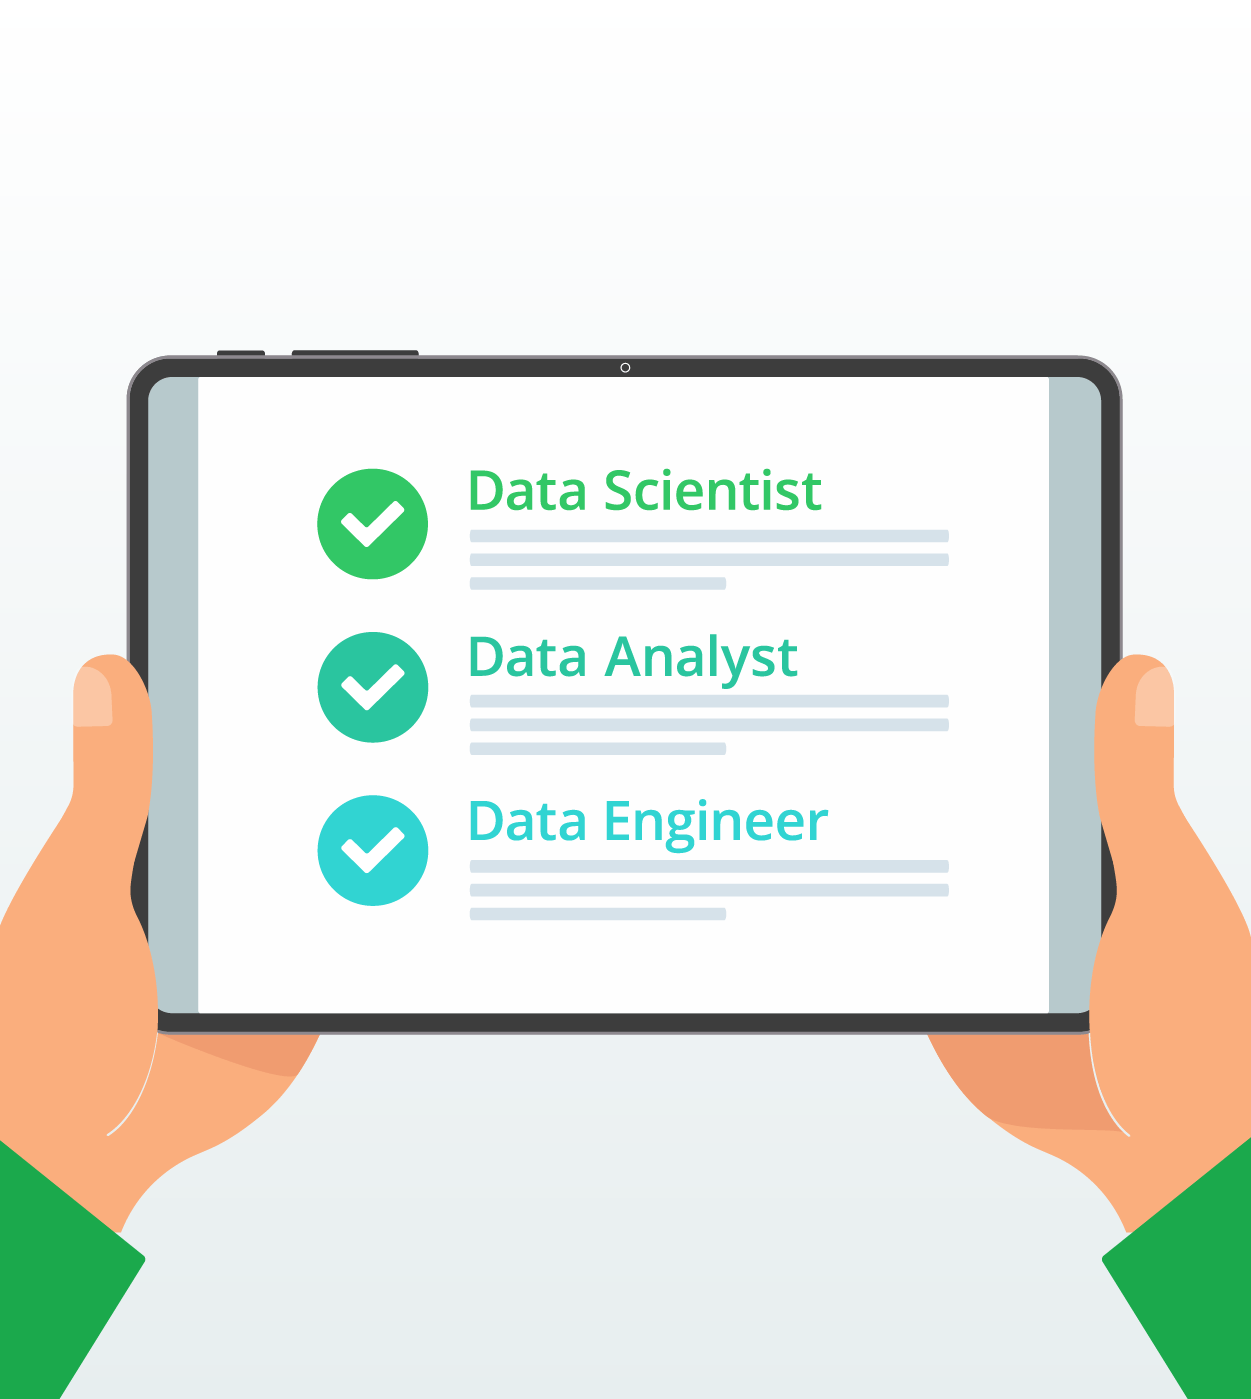 A pair of hands holding a tablet that lists the job titles Data Scientist, Data Analyst and Data Engineer on its screen